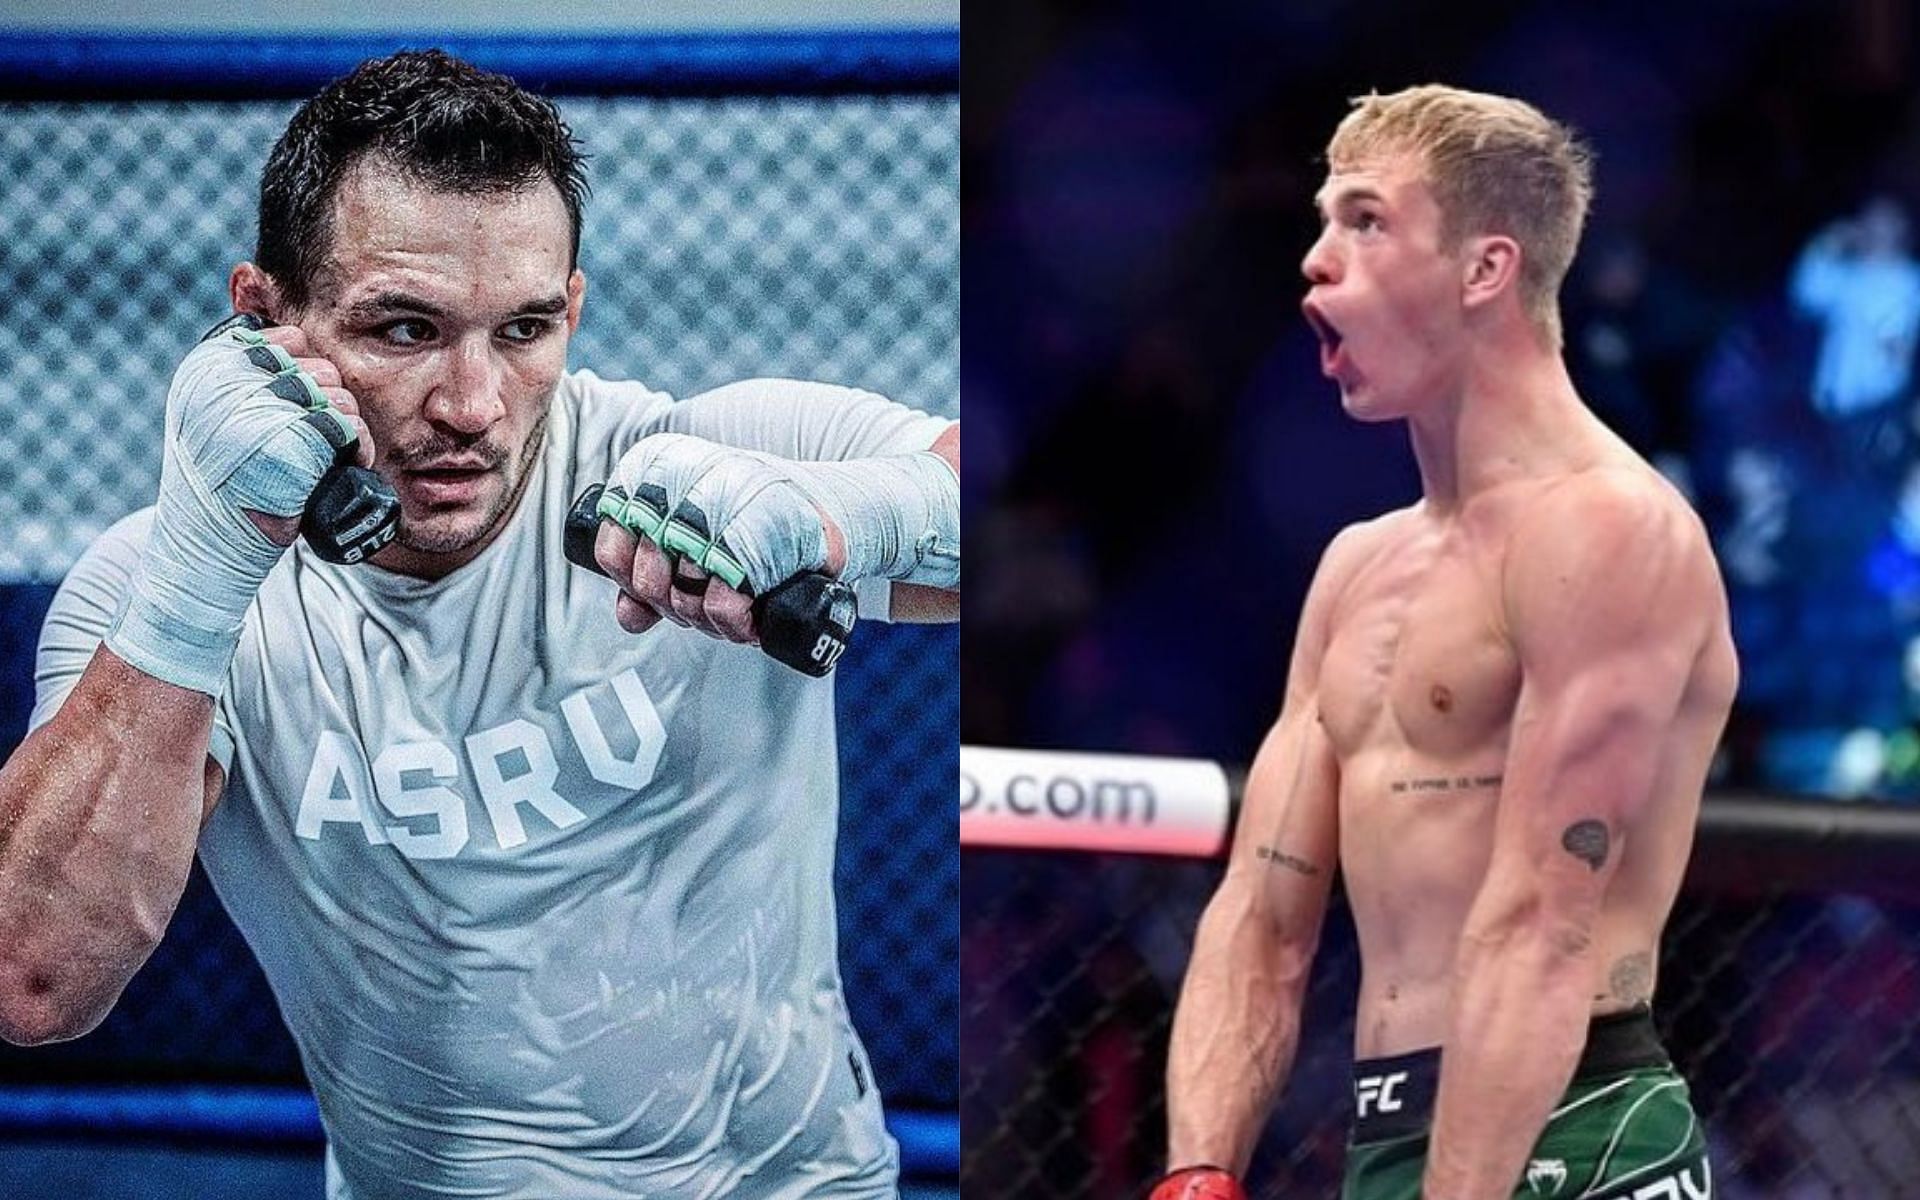 Michael Chandler (left), Ian Garry (right) [Image Courtesy: @mikechandlermma and @iangarry via Instagram]